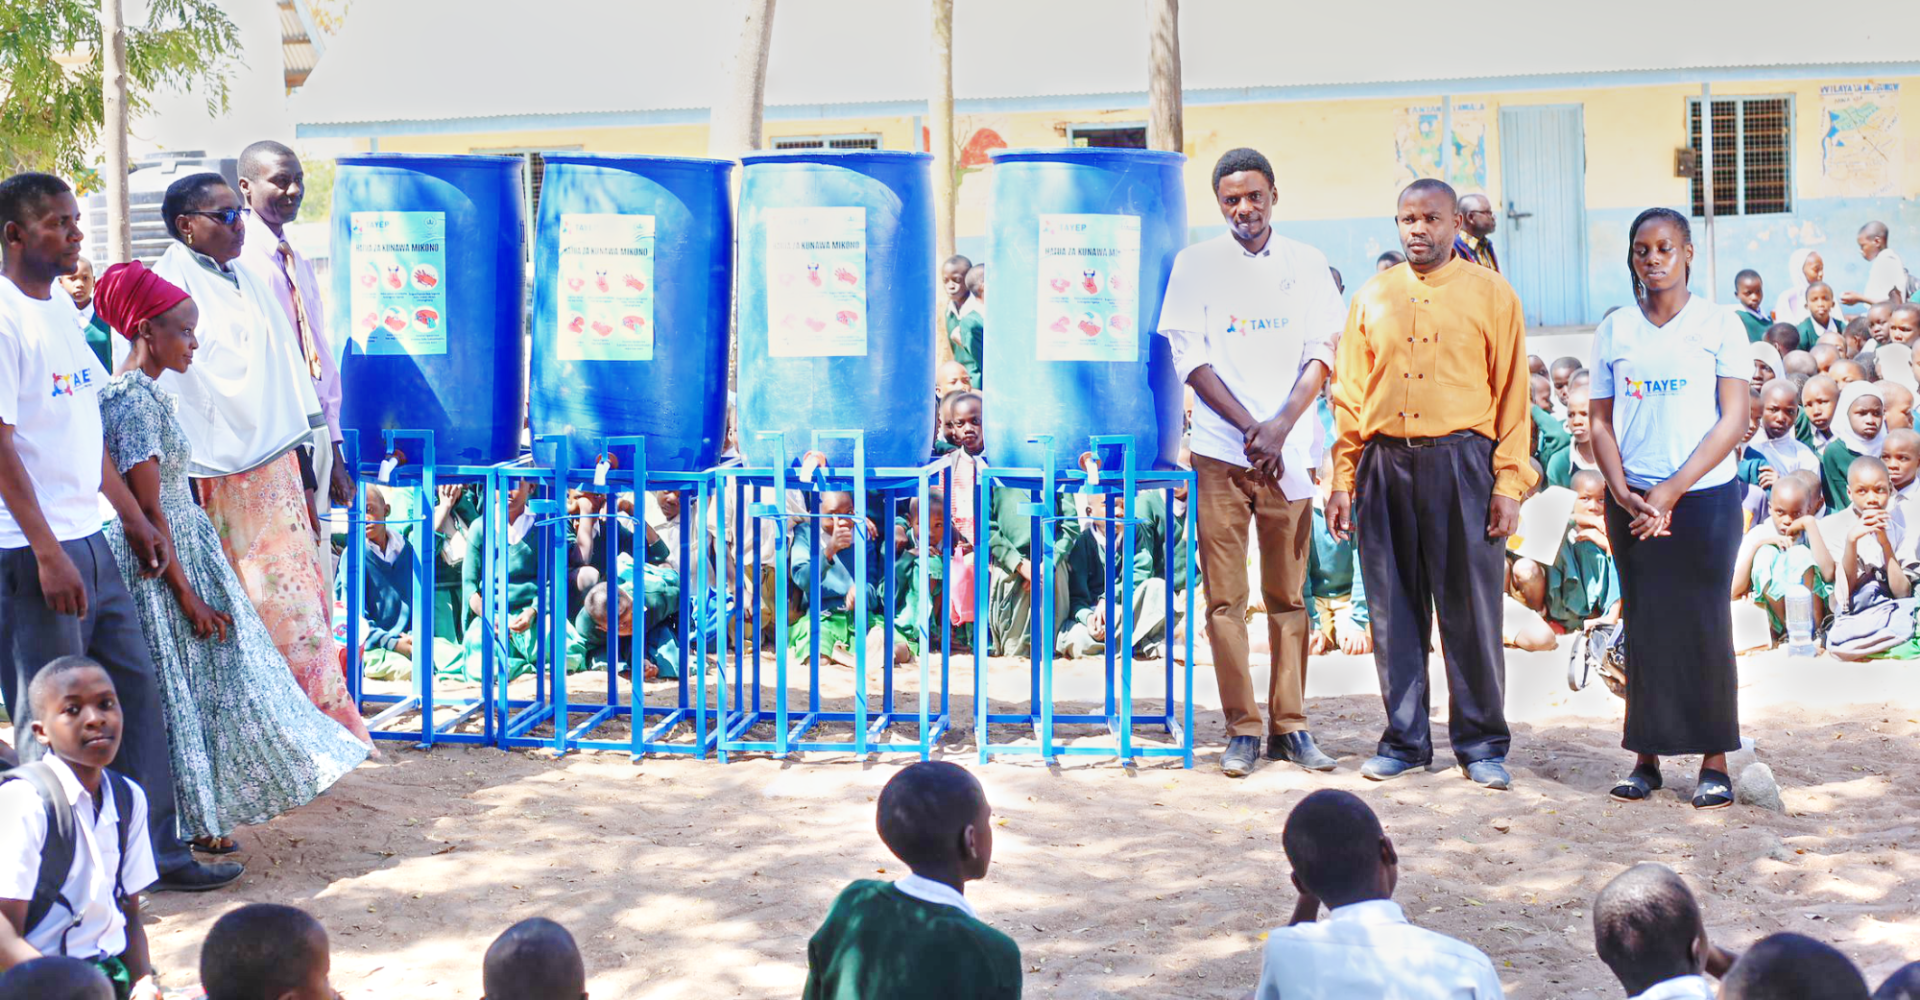 Tanzania Young Eco Protection (TAYEP) – pioneering clean water access, education, health and poverty reduction